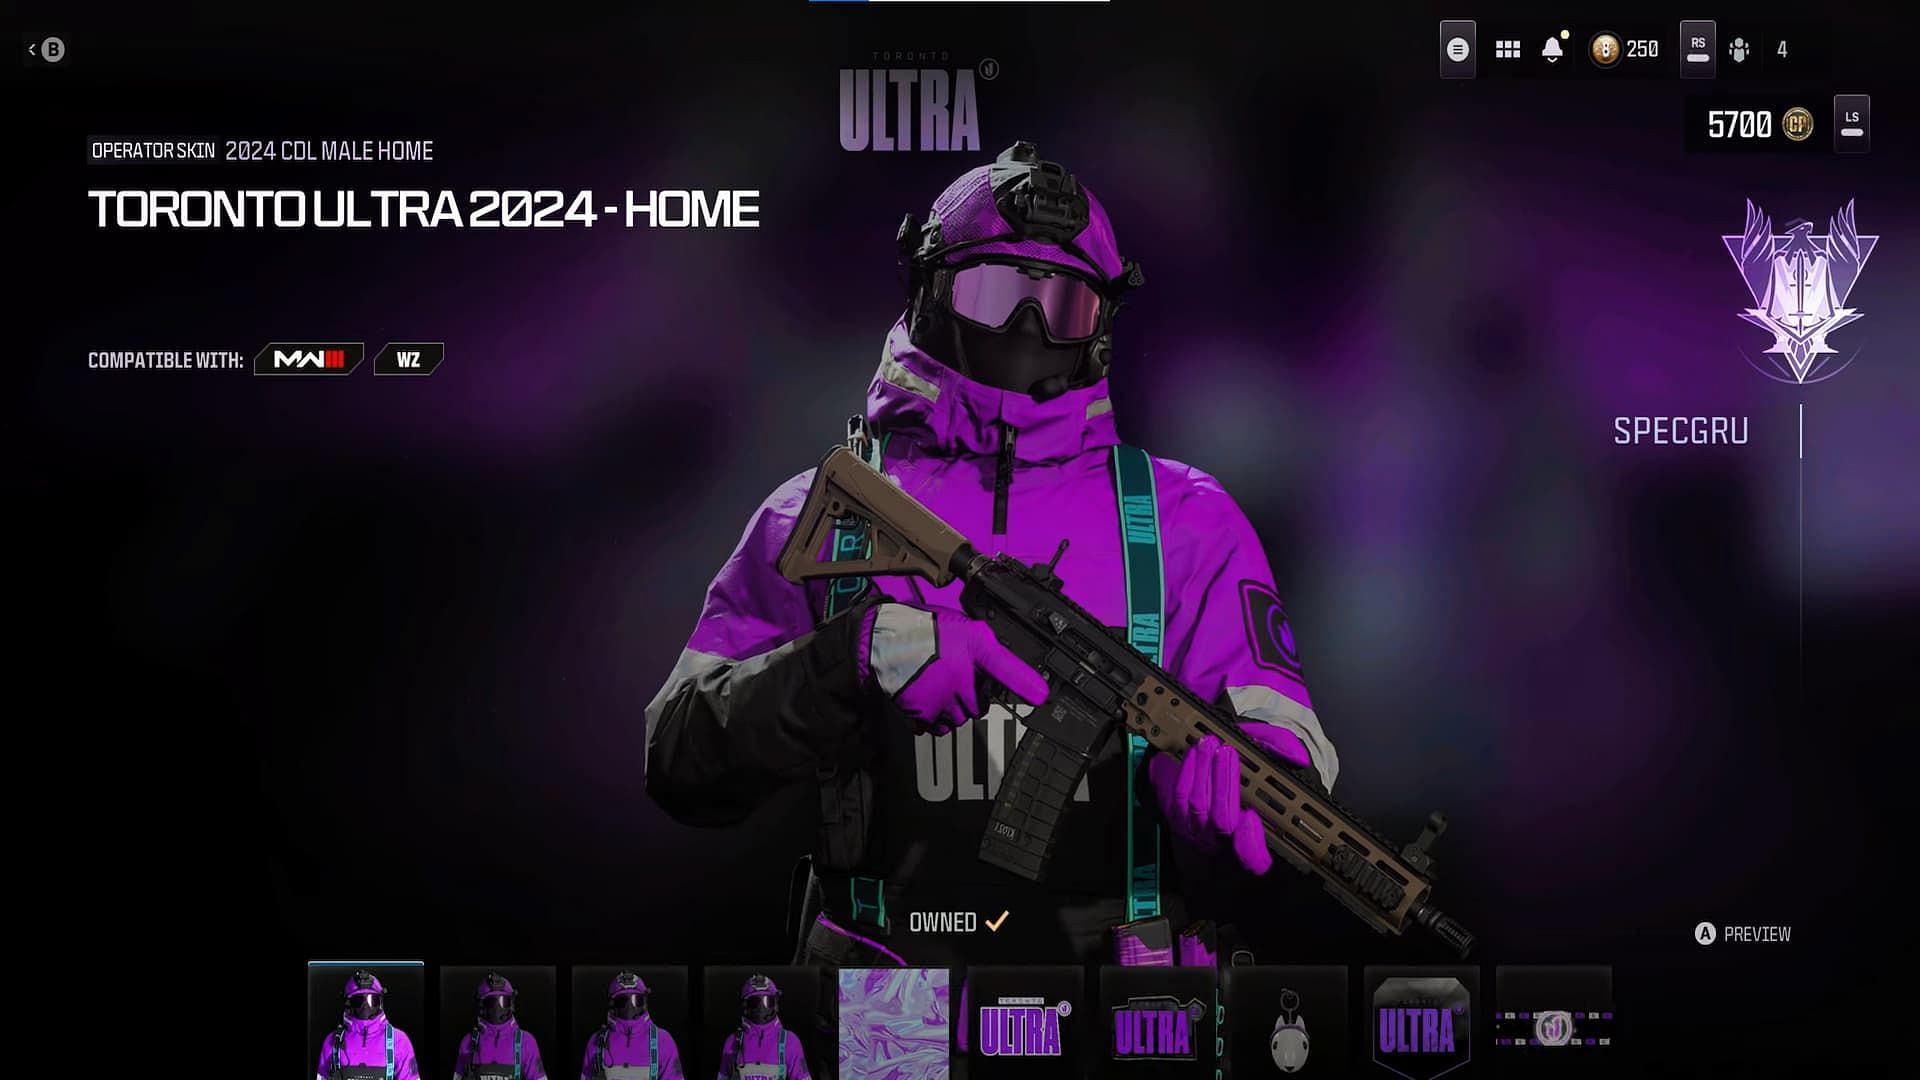 Toronto Ultra CDL teampack in MW3 and Warzone